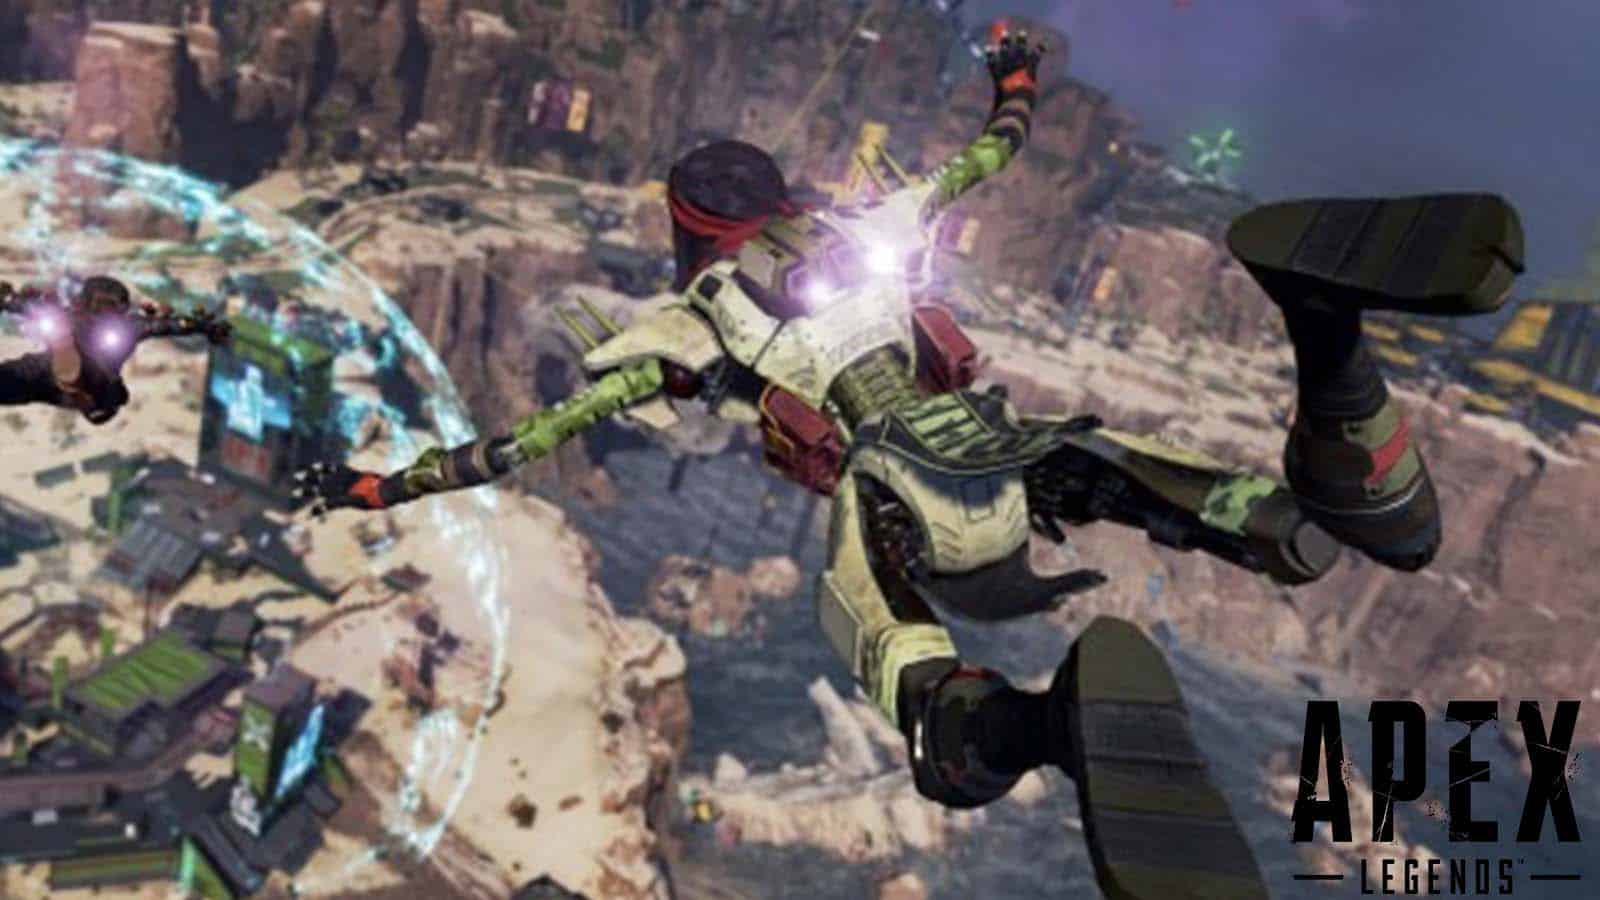 Dropping in Apex Legends